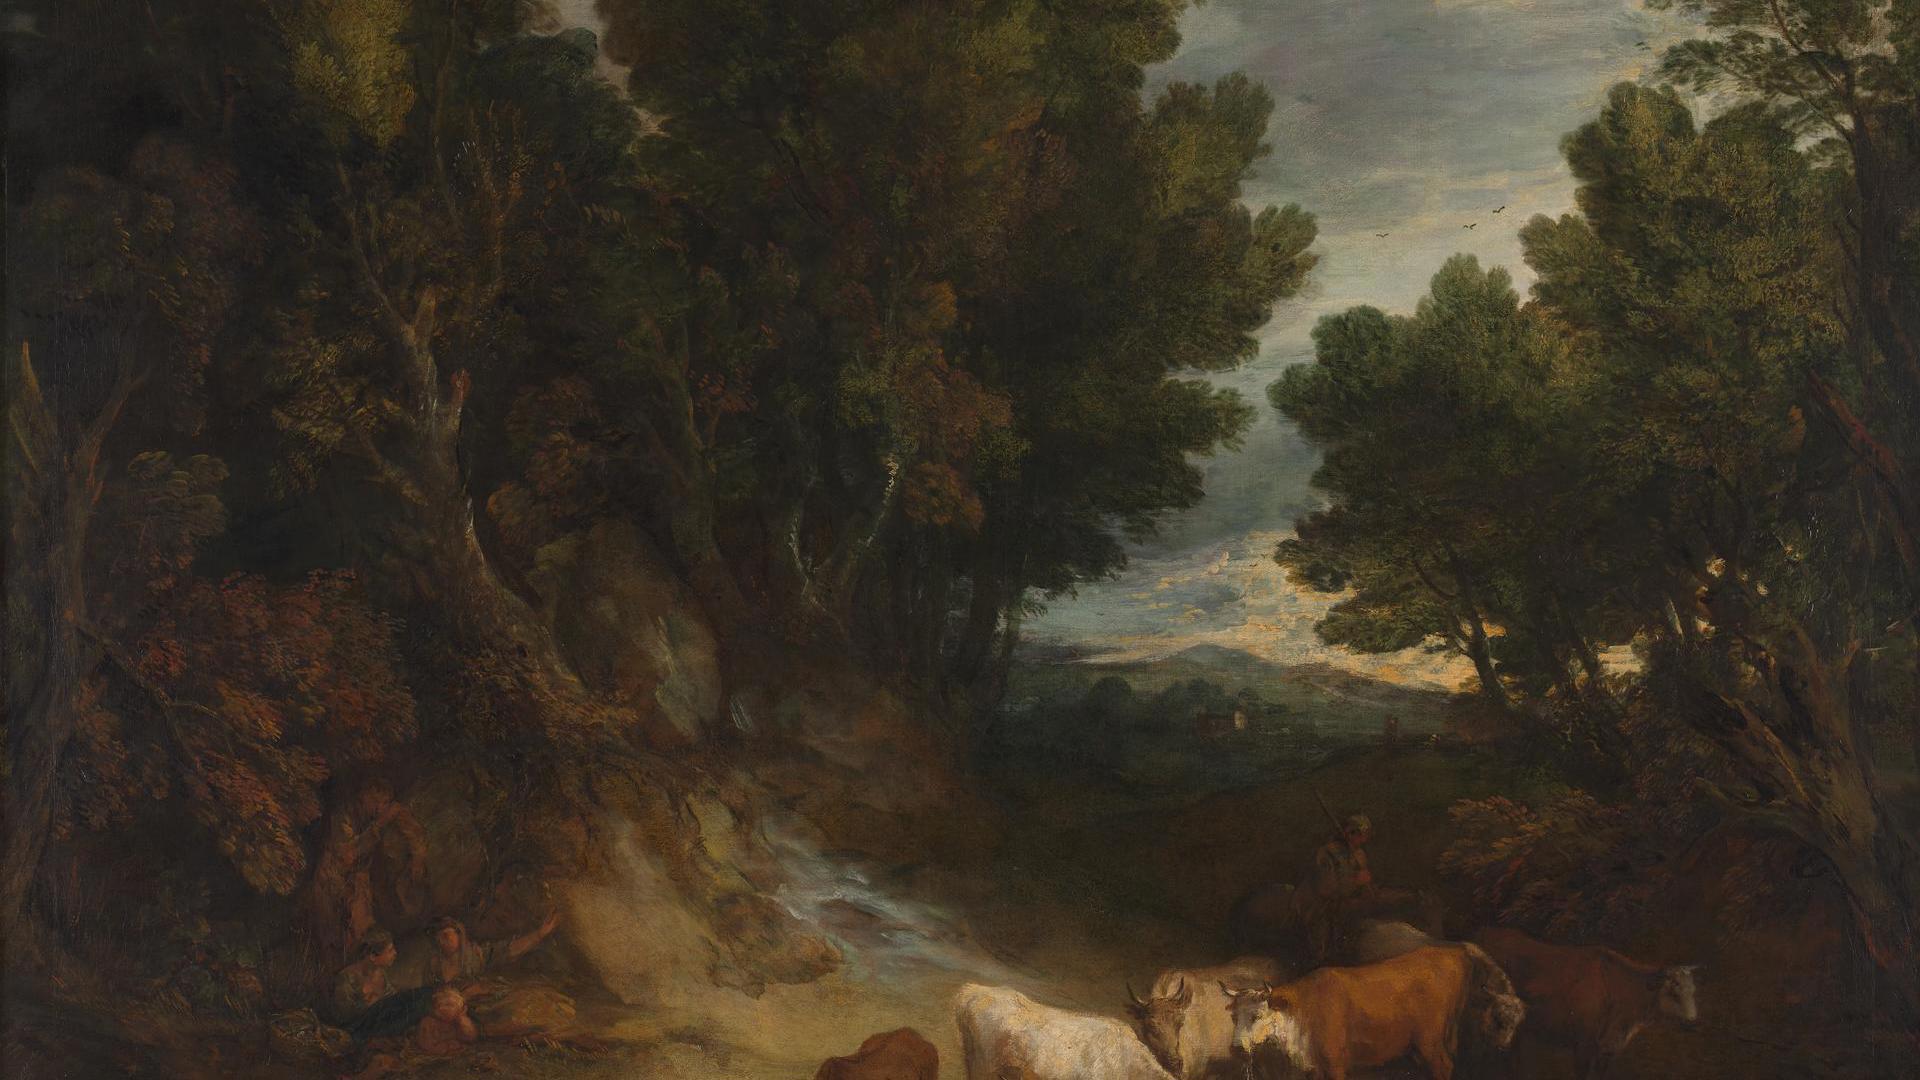 The Watering Place by Thomas Gainsborough